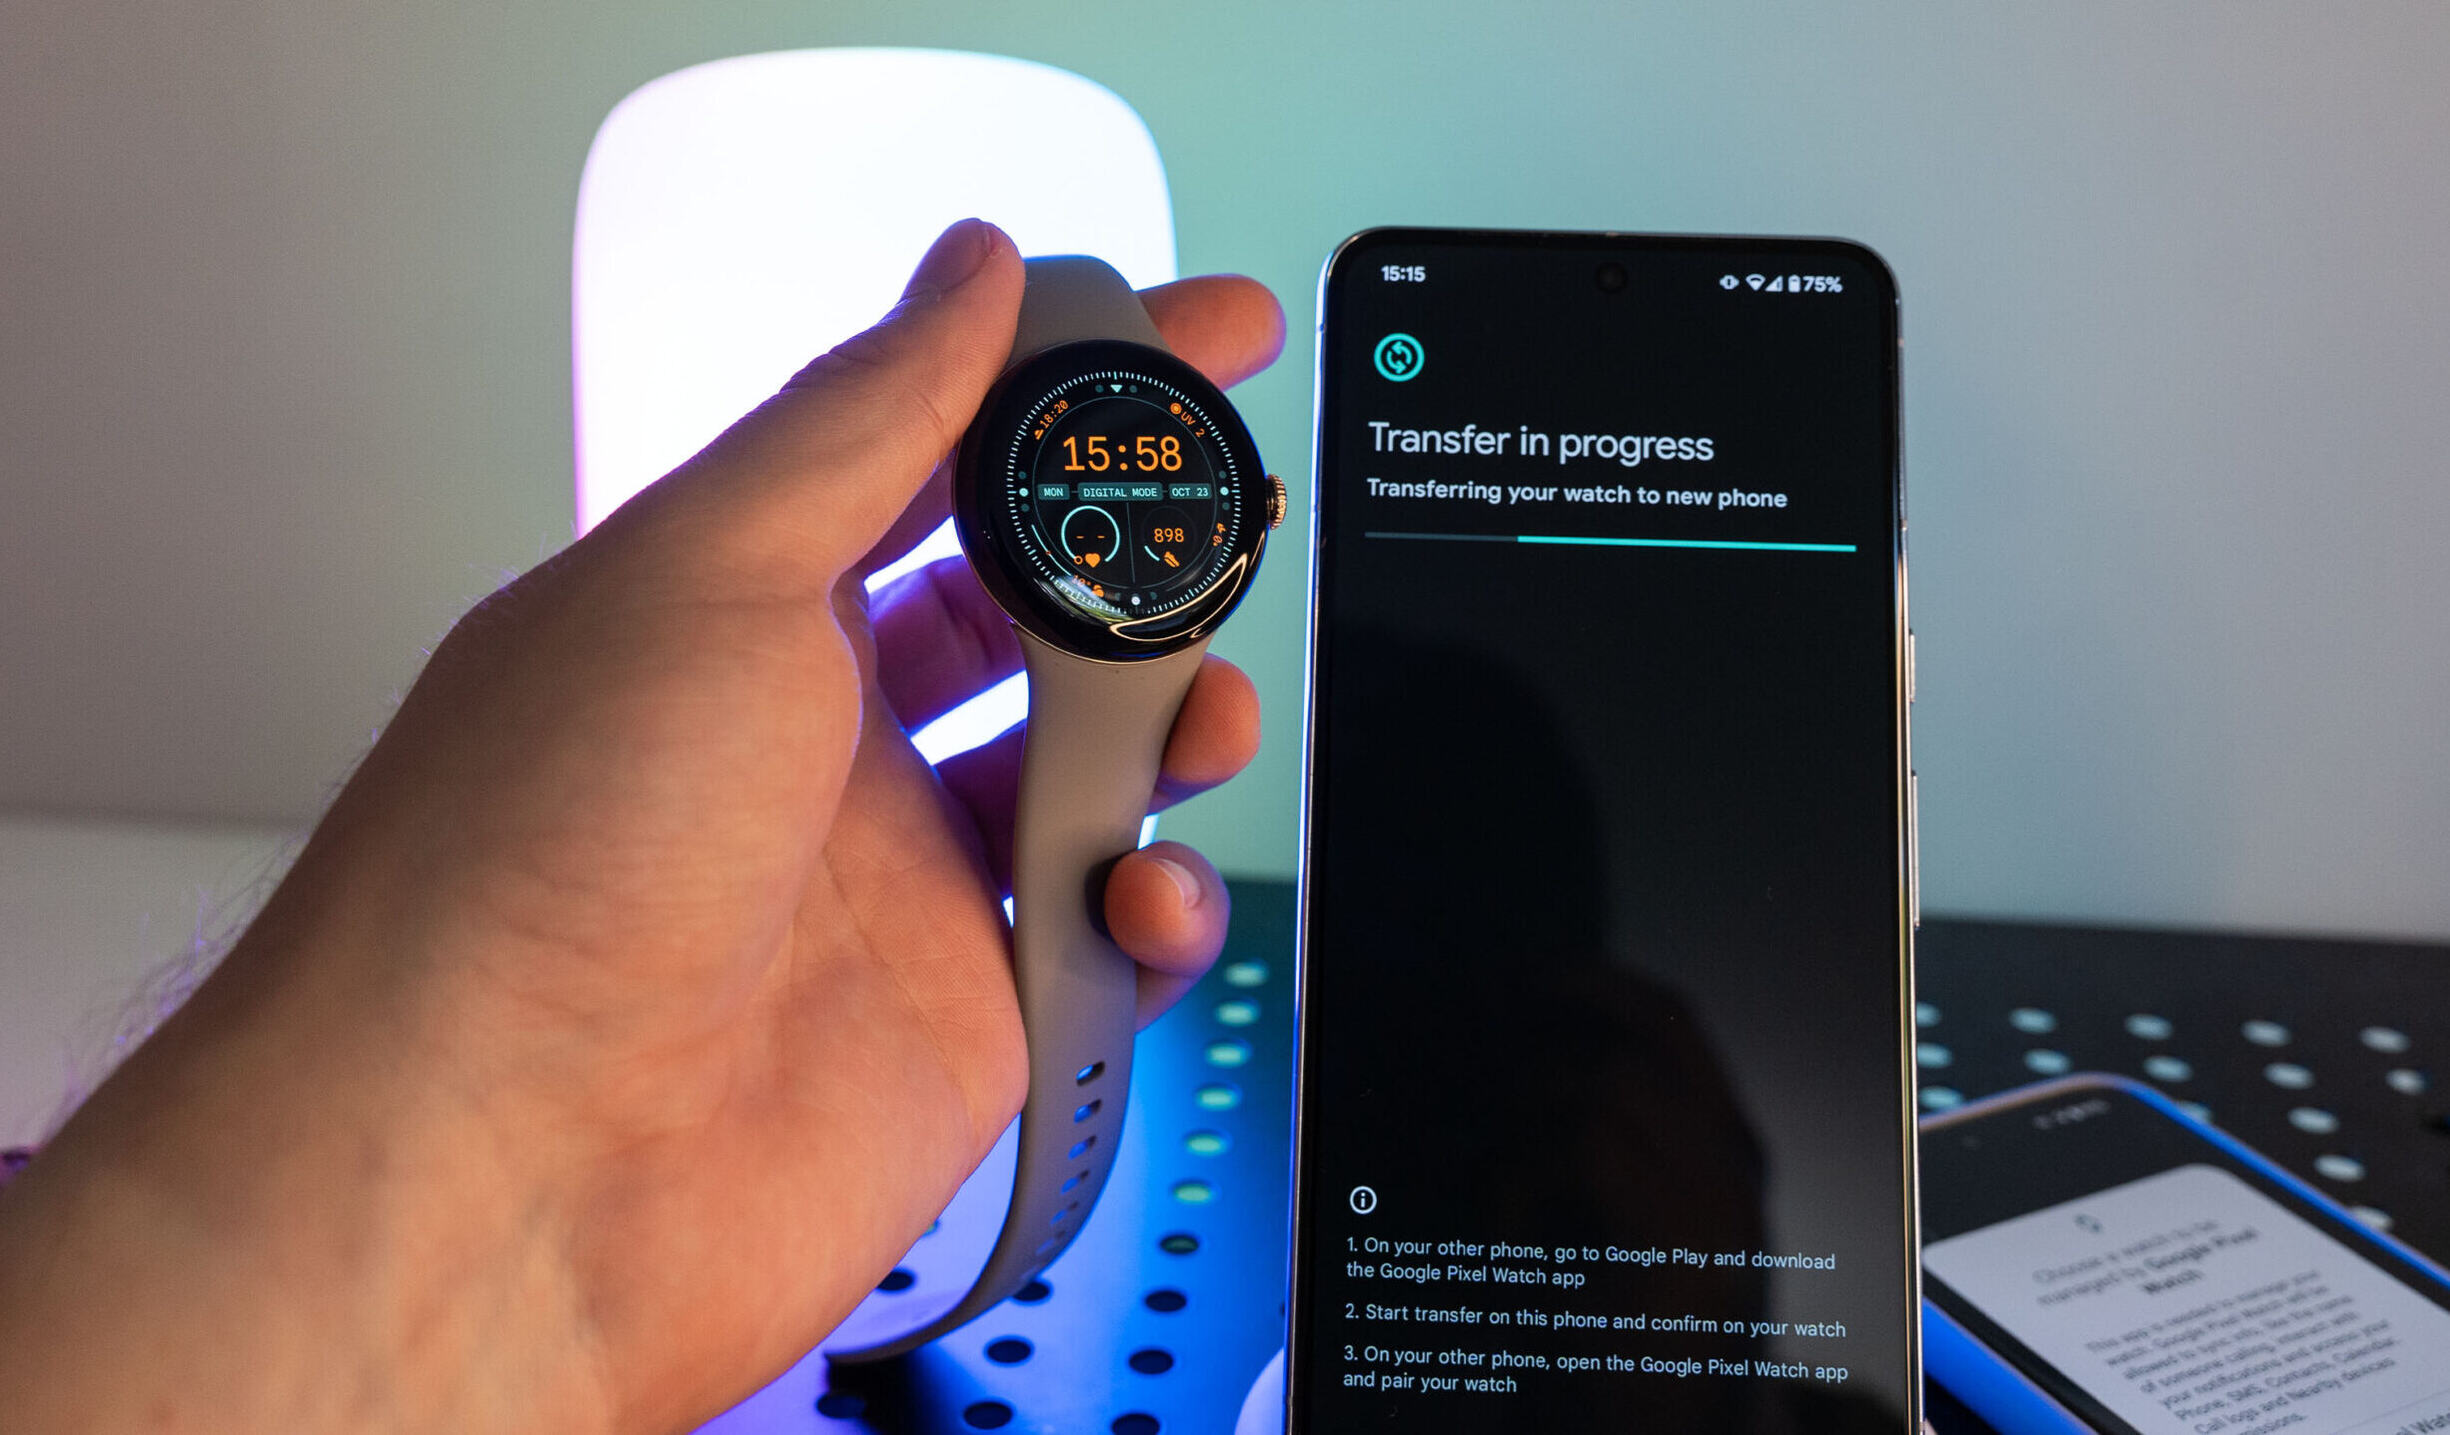 Syncing Devices: Connecting LG Smartwatch To Pixel 4